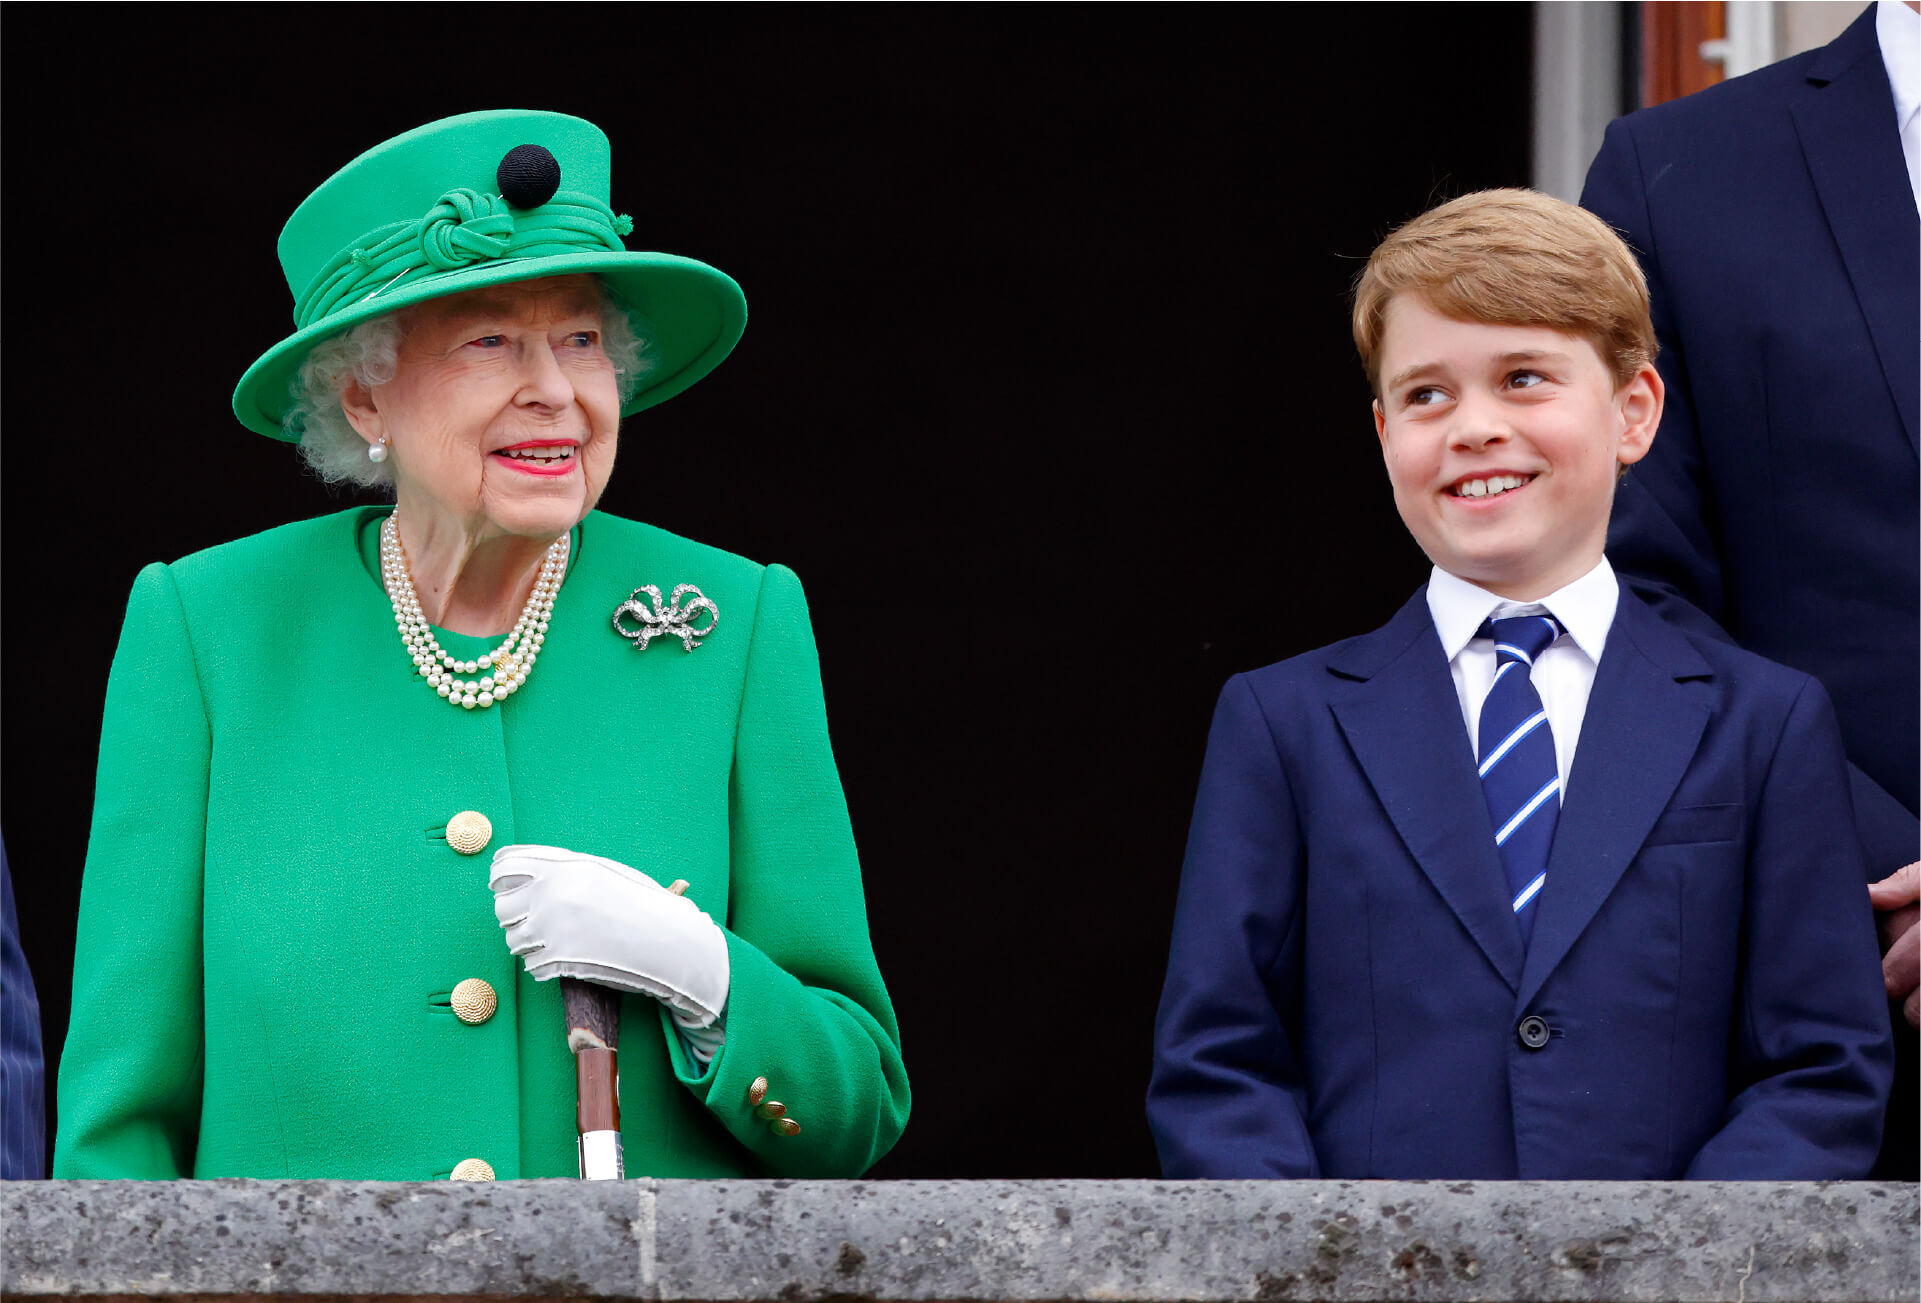 Queen Elizabeth stands on a balcony next to a smiling young Prince George. The Queen wears an emerald green suit jacket with a matching wide-brimmed hat, a three-string pearl necklace and a diamond brooch. She leans on a cane which she grips with a white gloved hand.